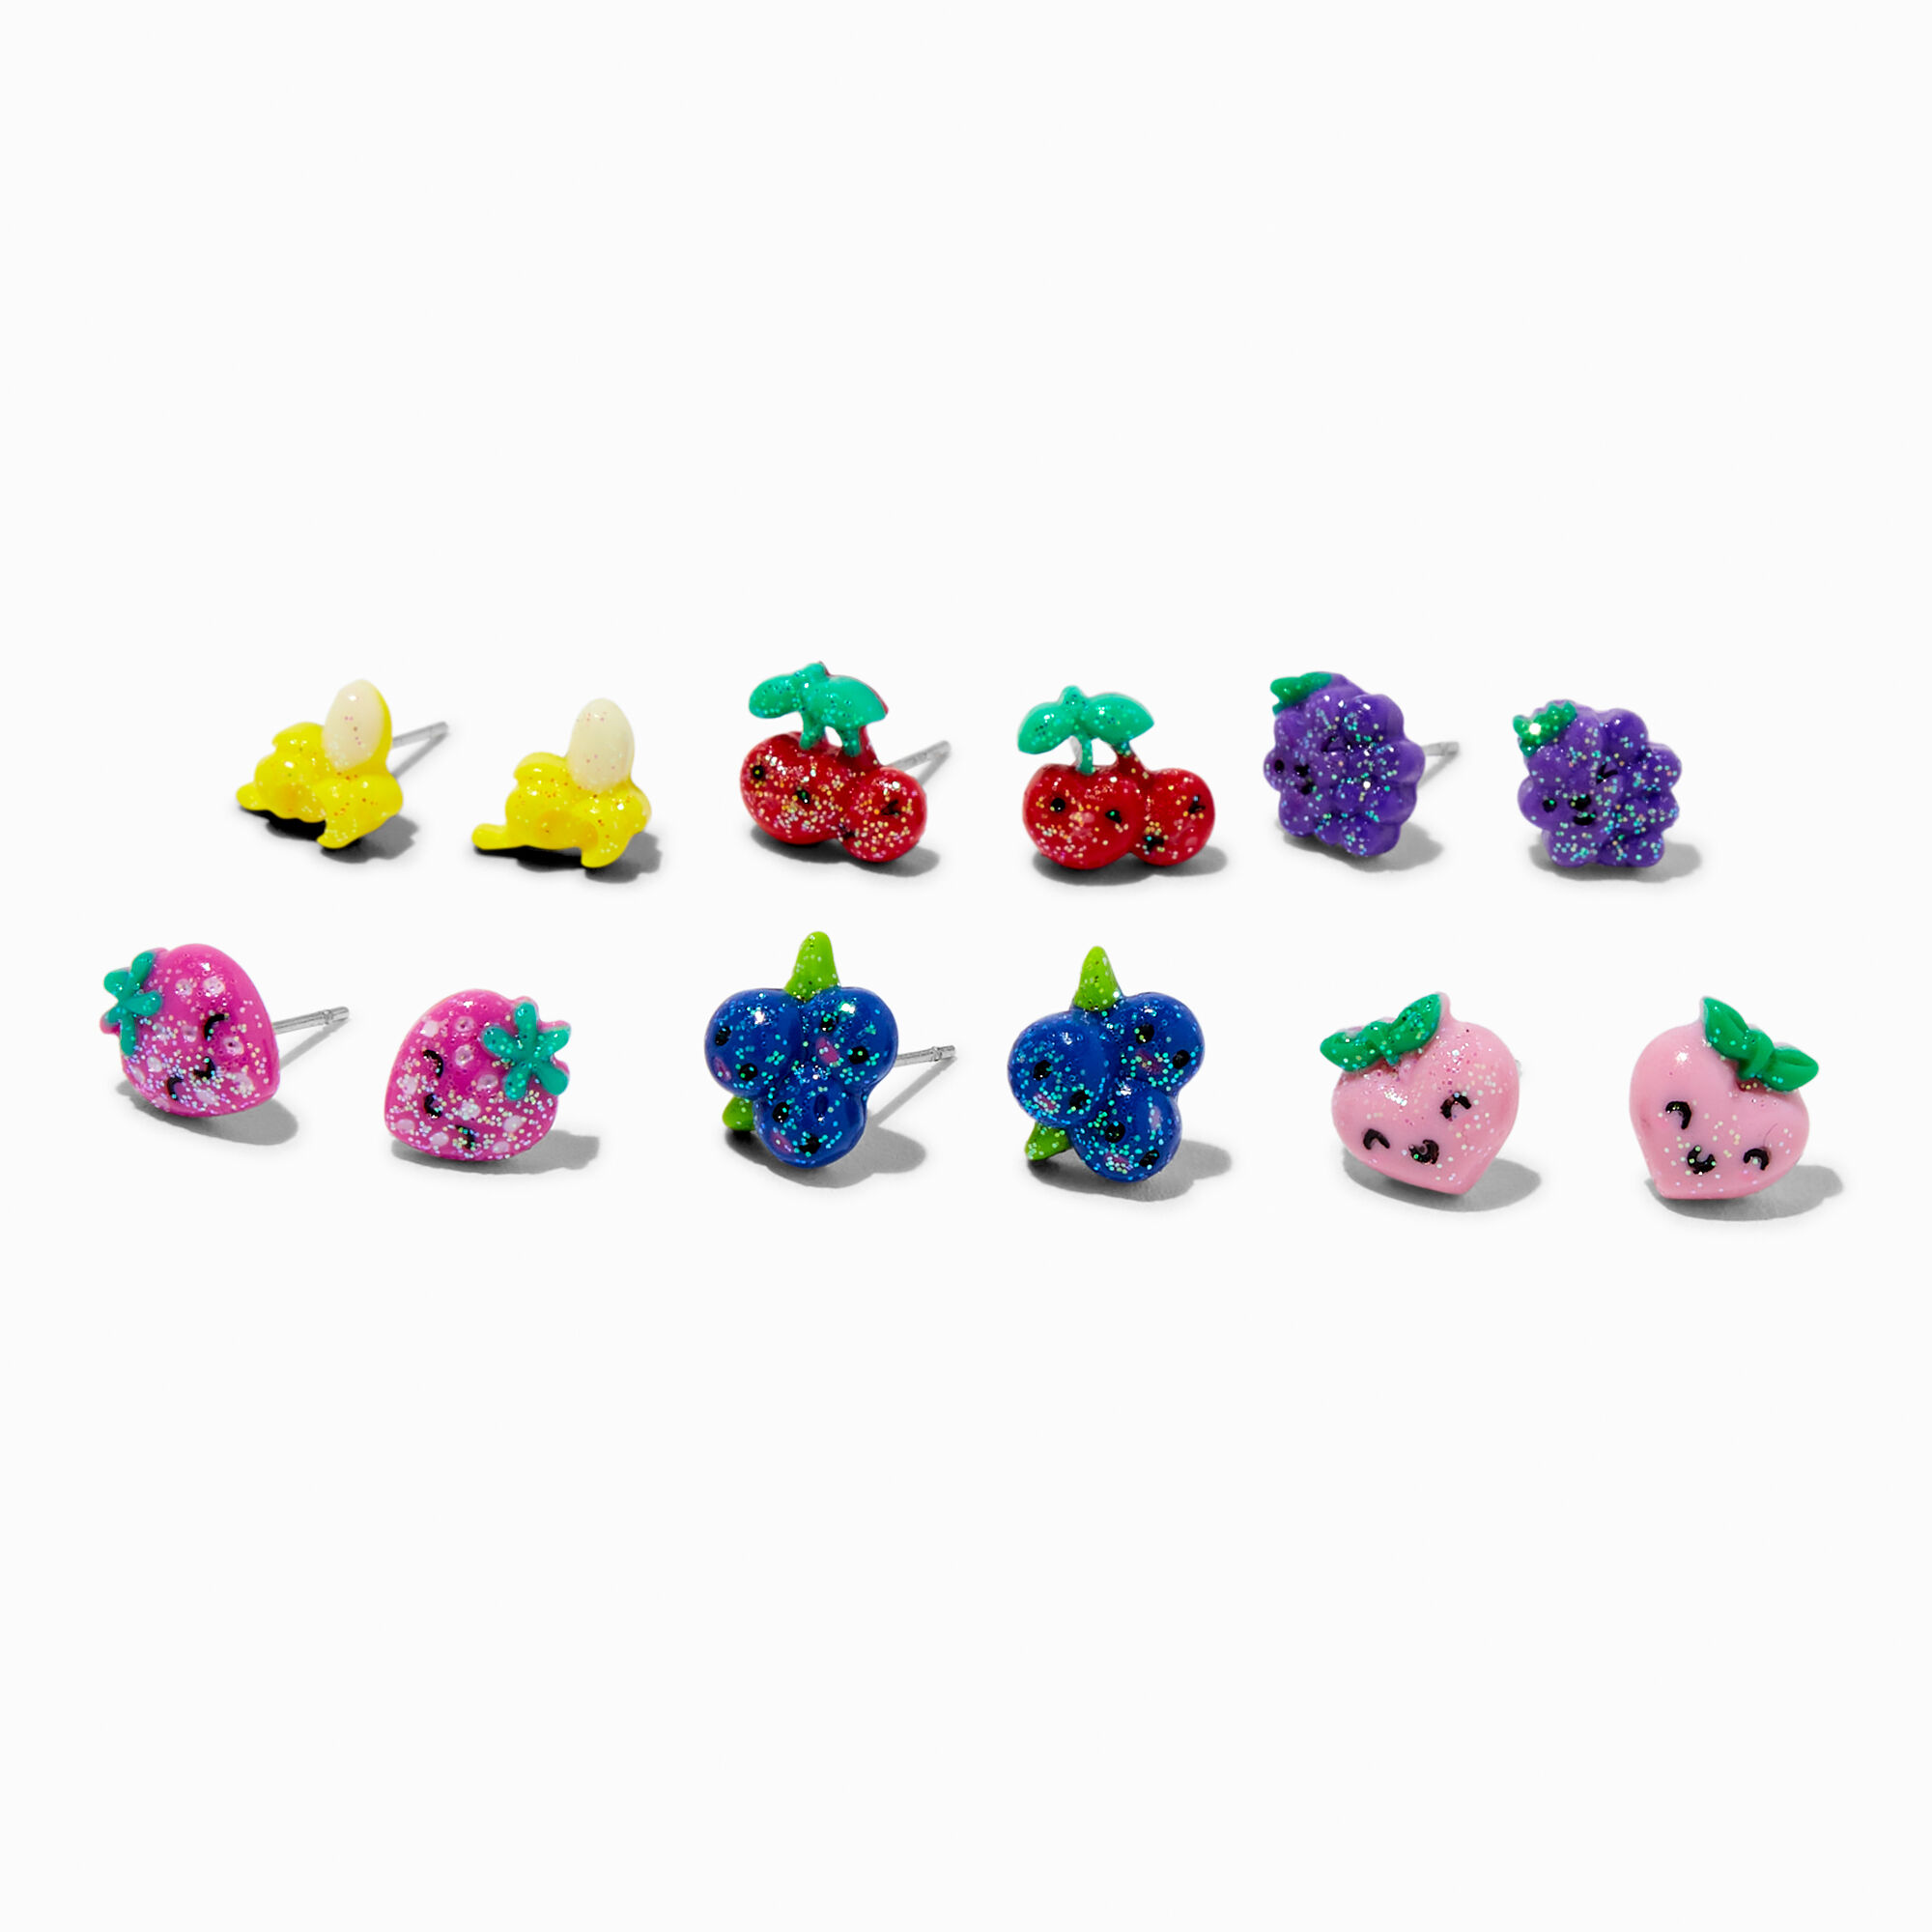 View Claires Fresh Fruit Glitter Stud Earrings 6 Pack information